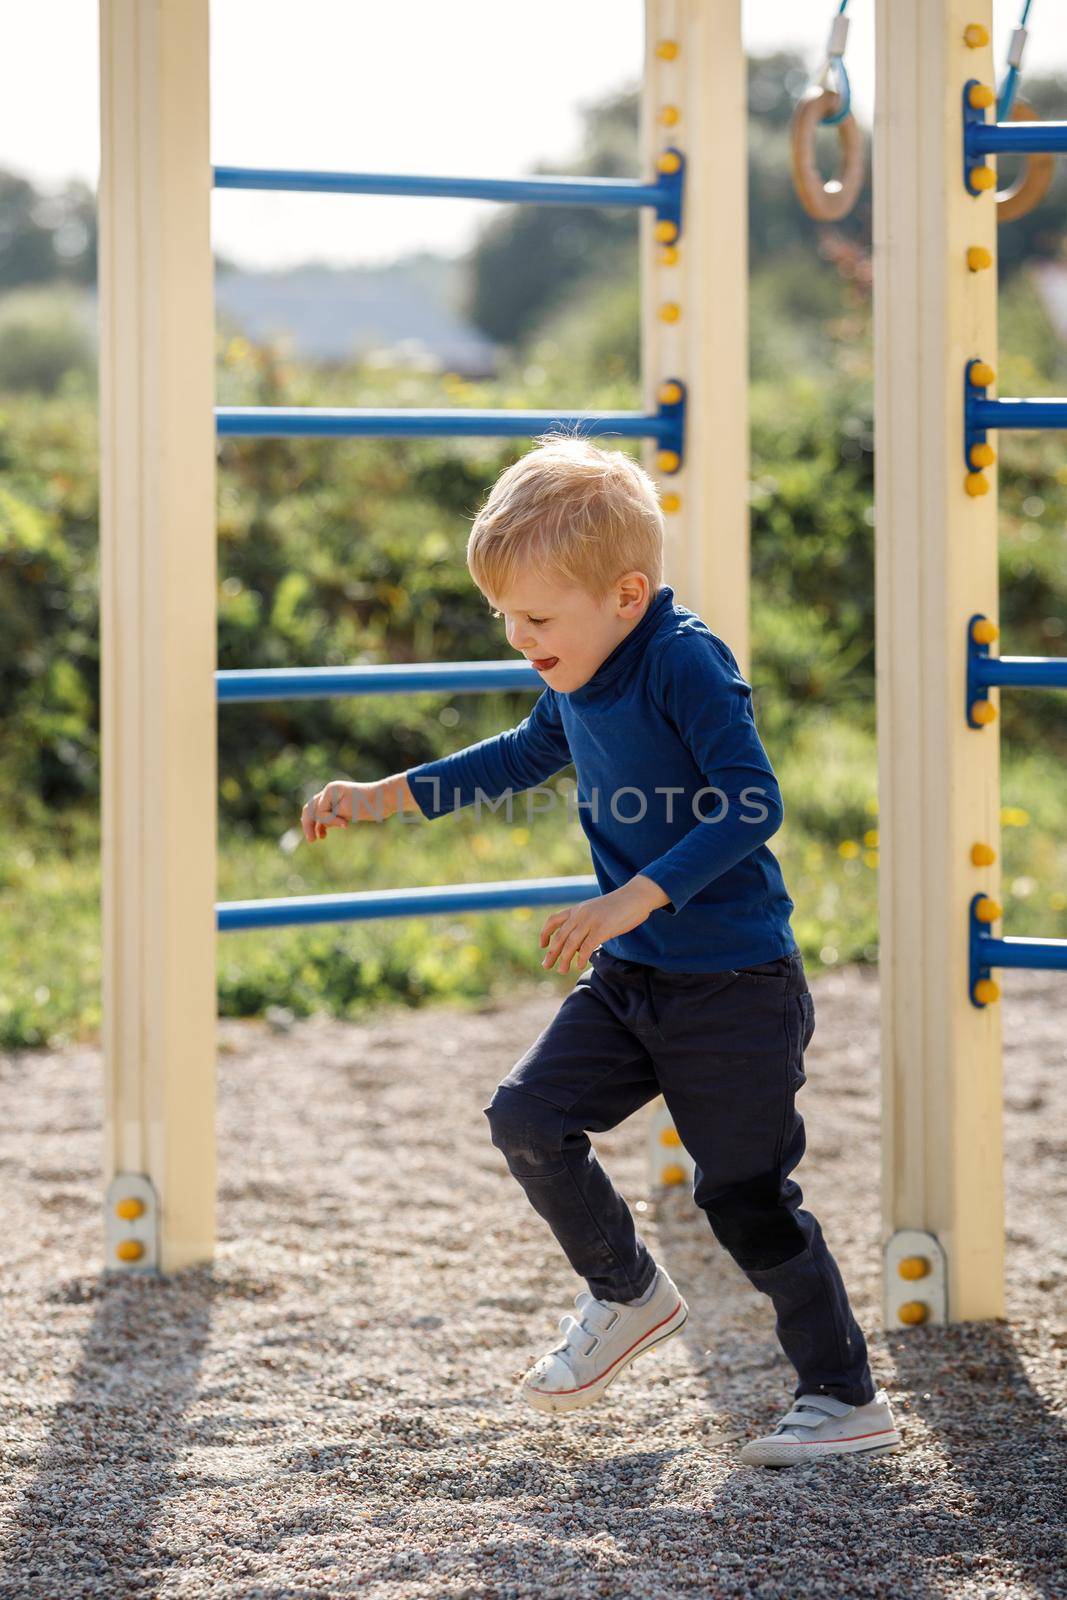 The little boy starts run forward outside on a playground on a summer day. The concept of child sport and active in fresh air.